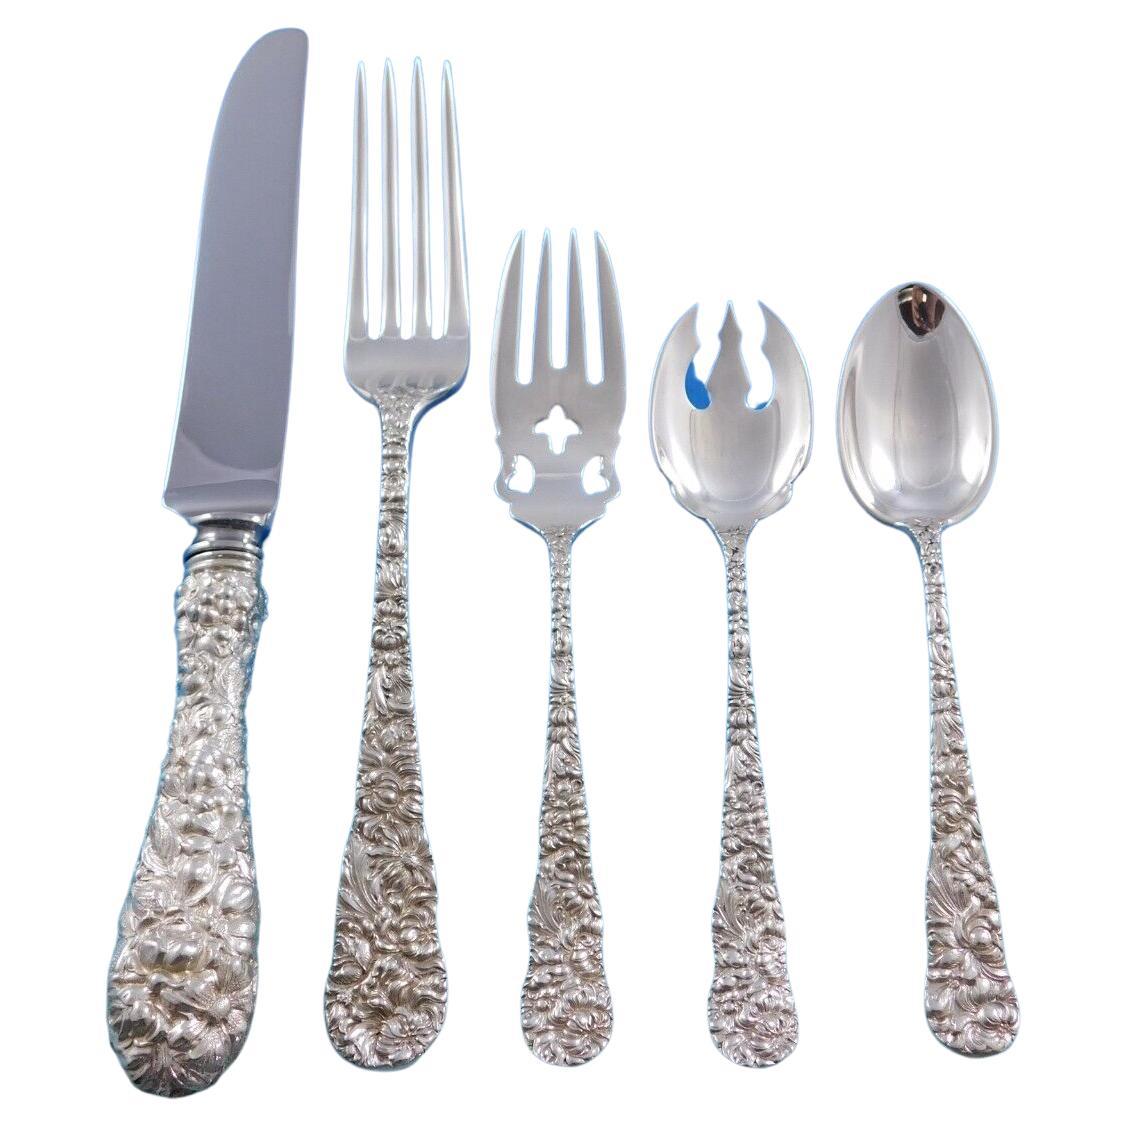 Chrysanthemum by Stieff Sterling Silver Flatware Set 12 Service 64 pcs Dinner For Sale